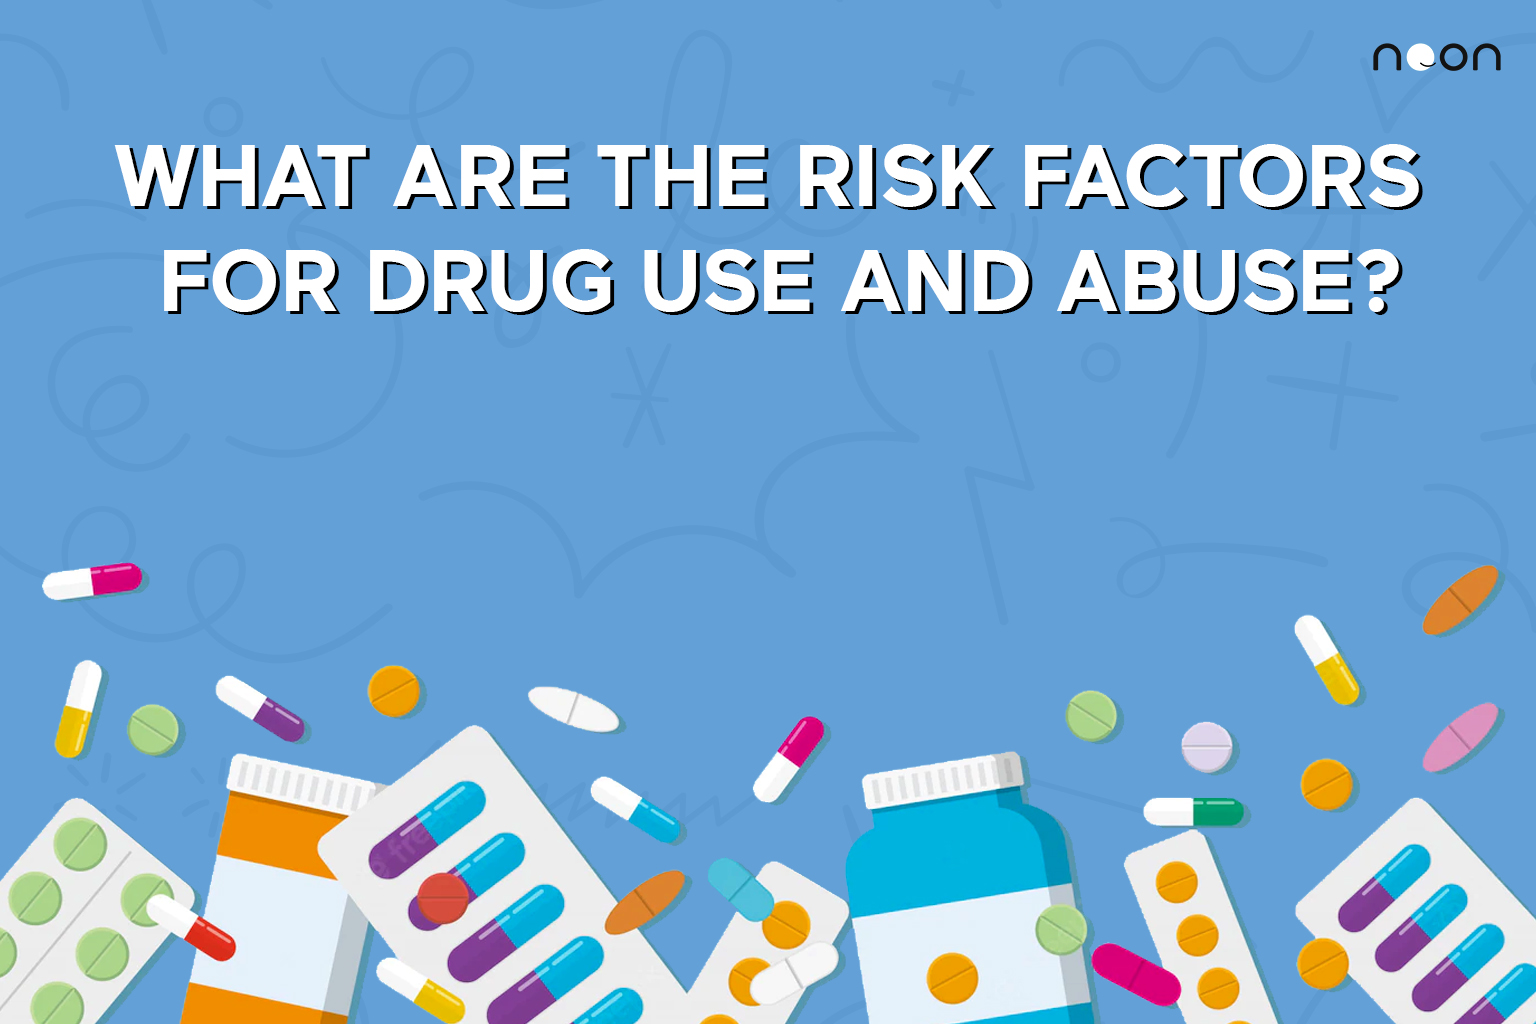 Drug use and abuse risk factors